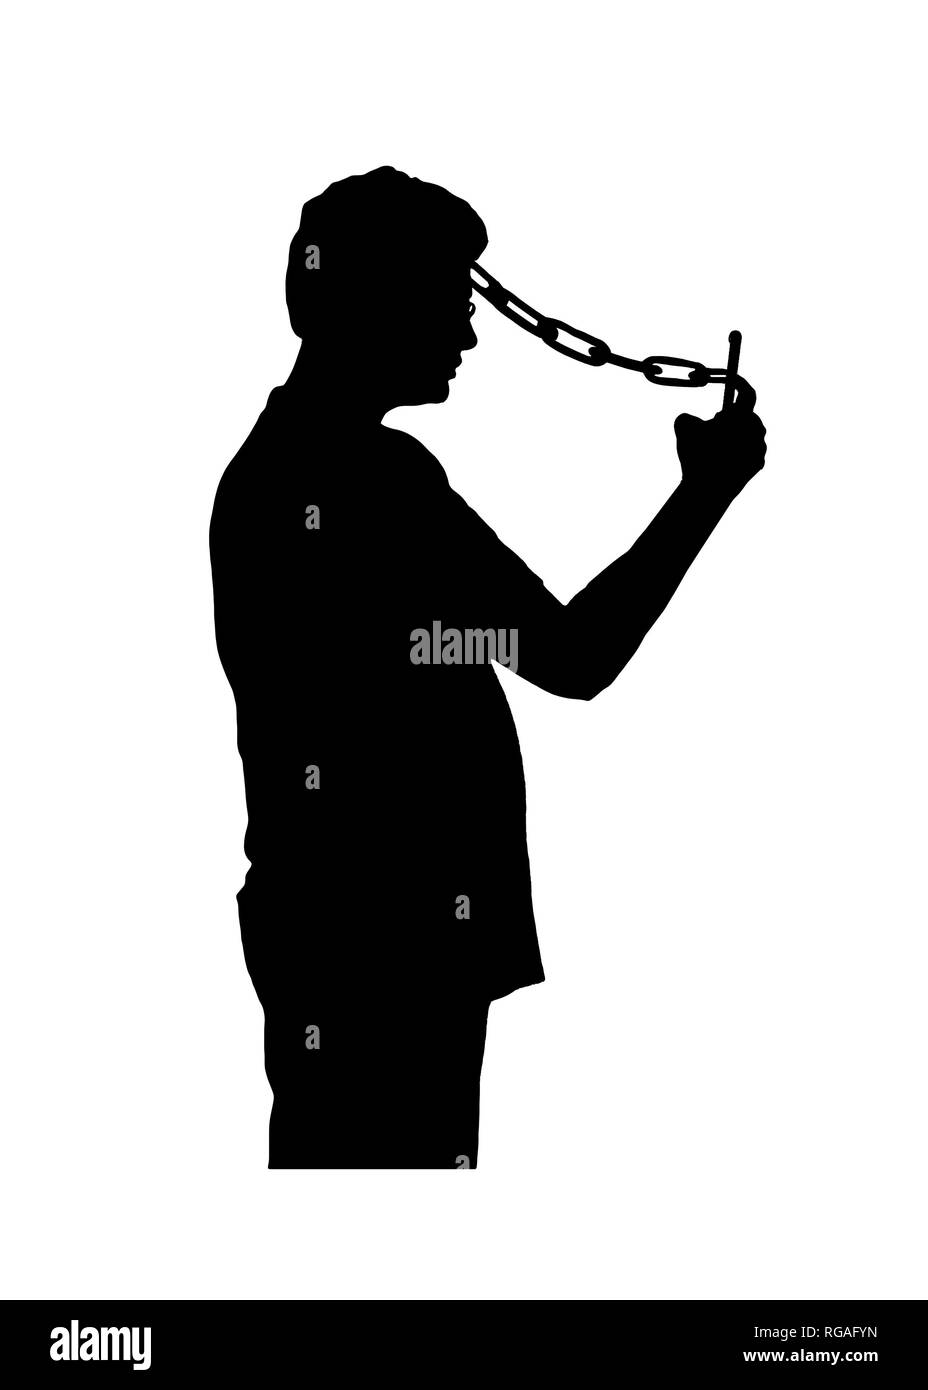 Silhouette graphic illustration template mobile phone addiction concept Stock Photo